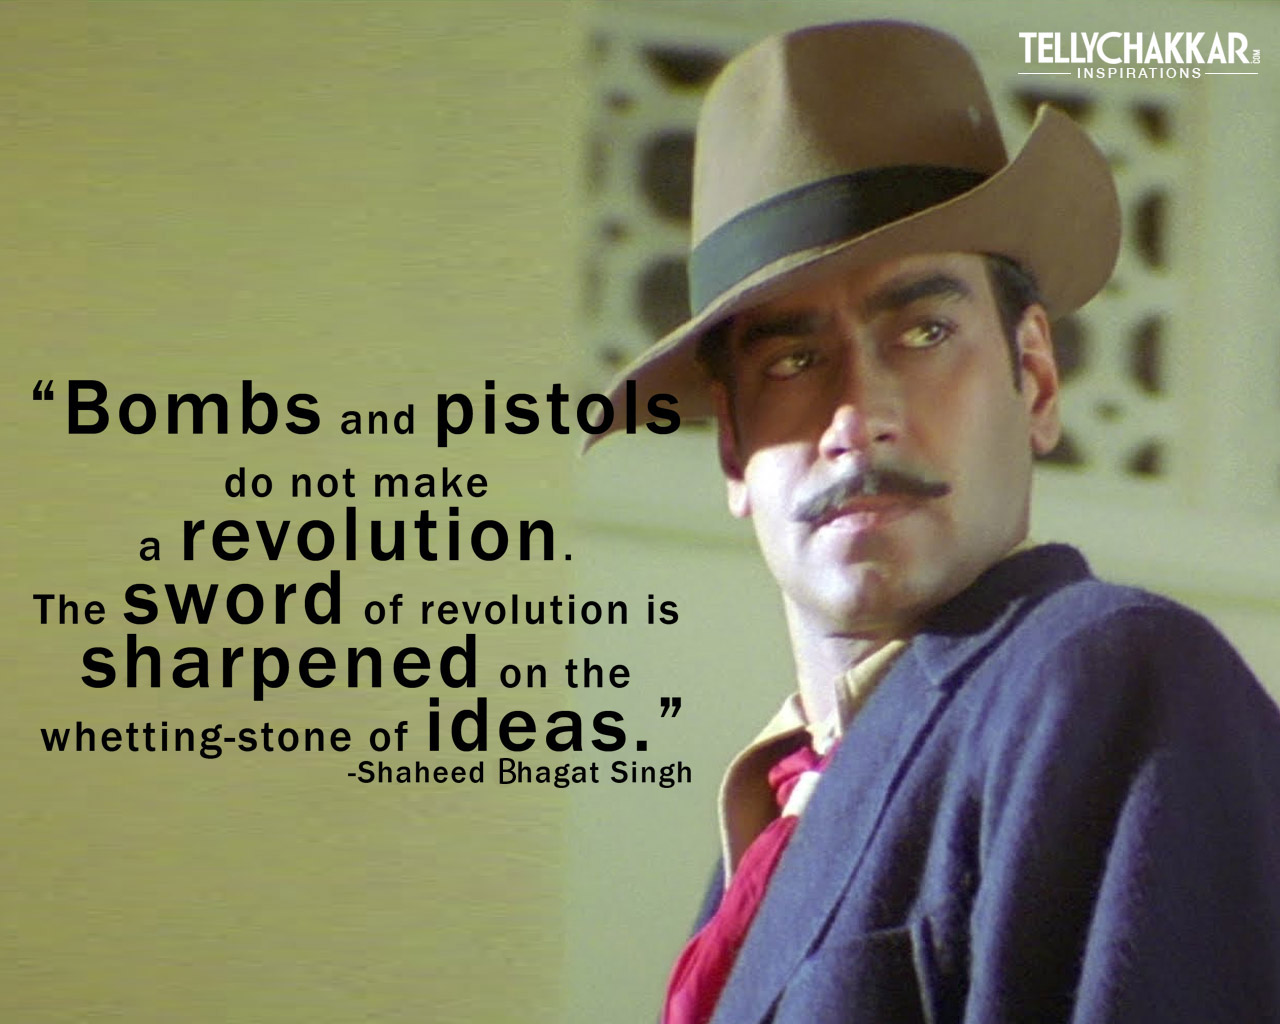 Legend Of Bhagat Singh Quotes - HD Wallpaper 